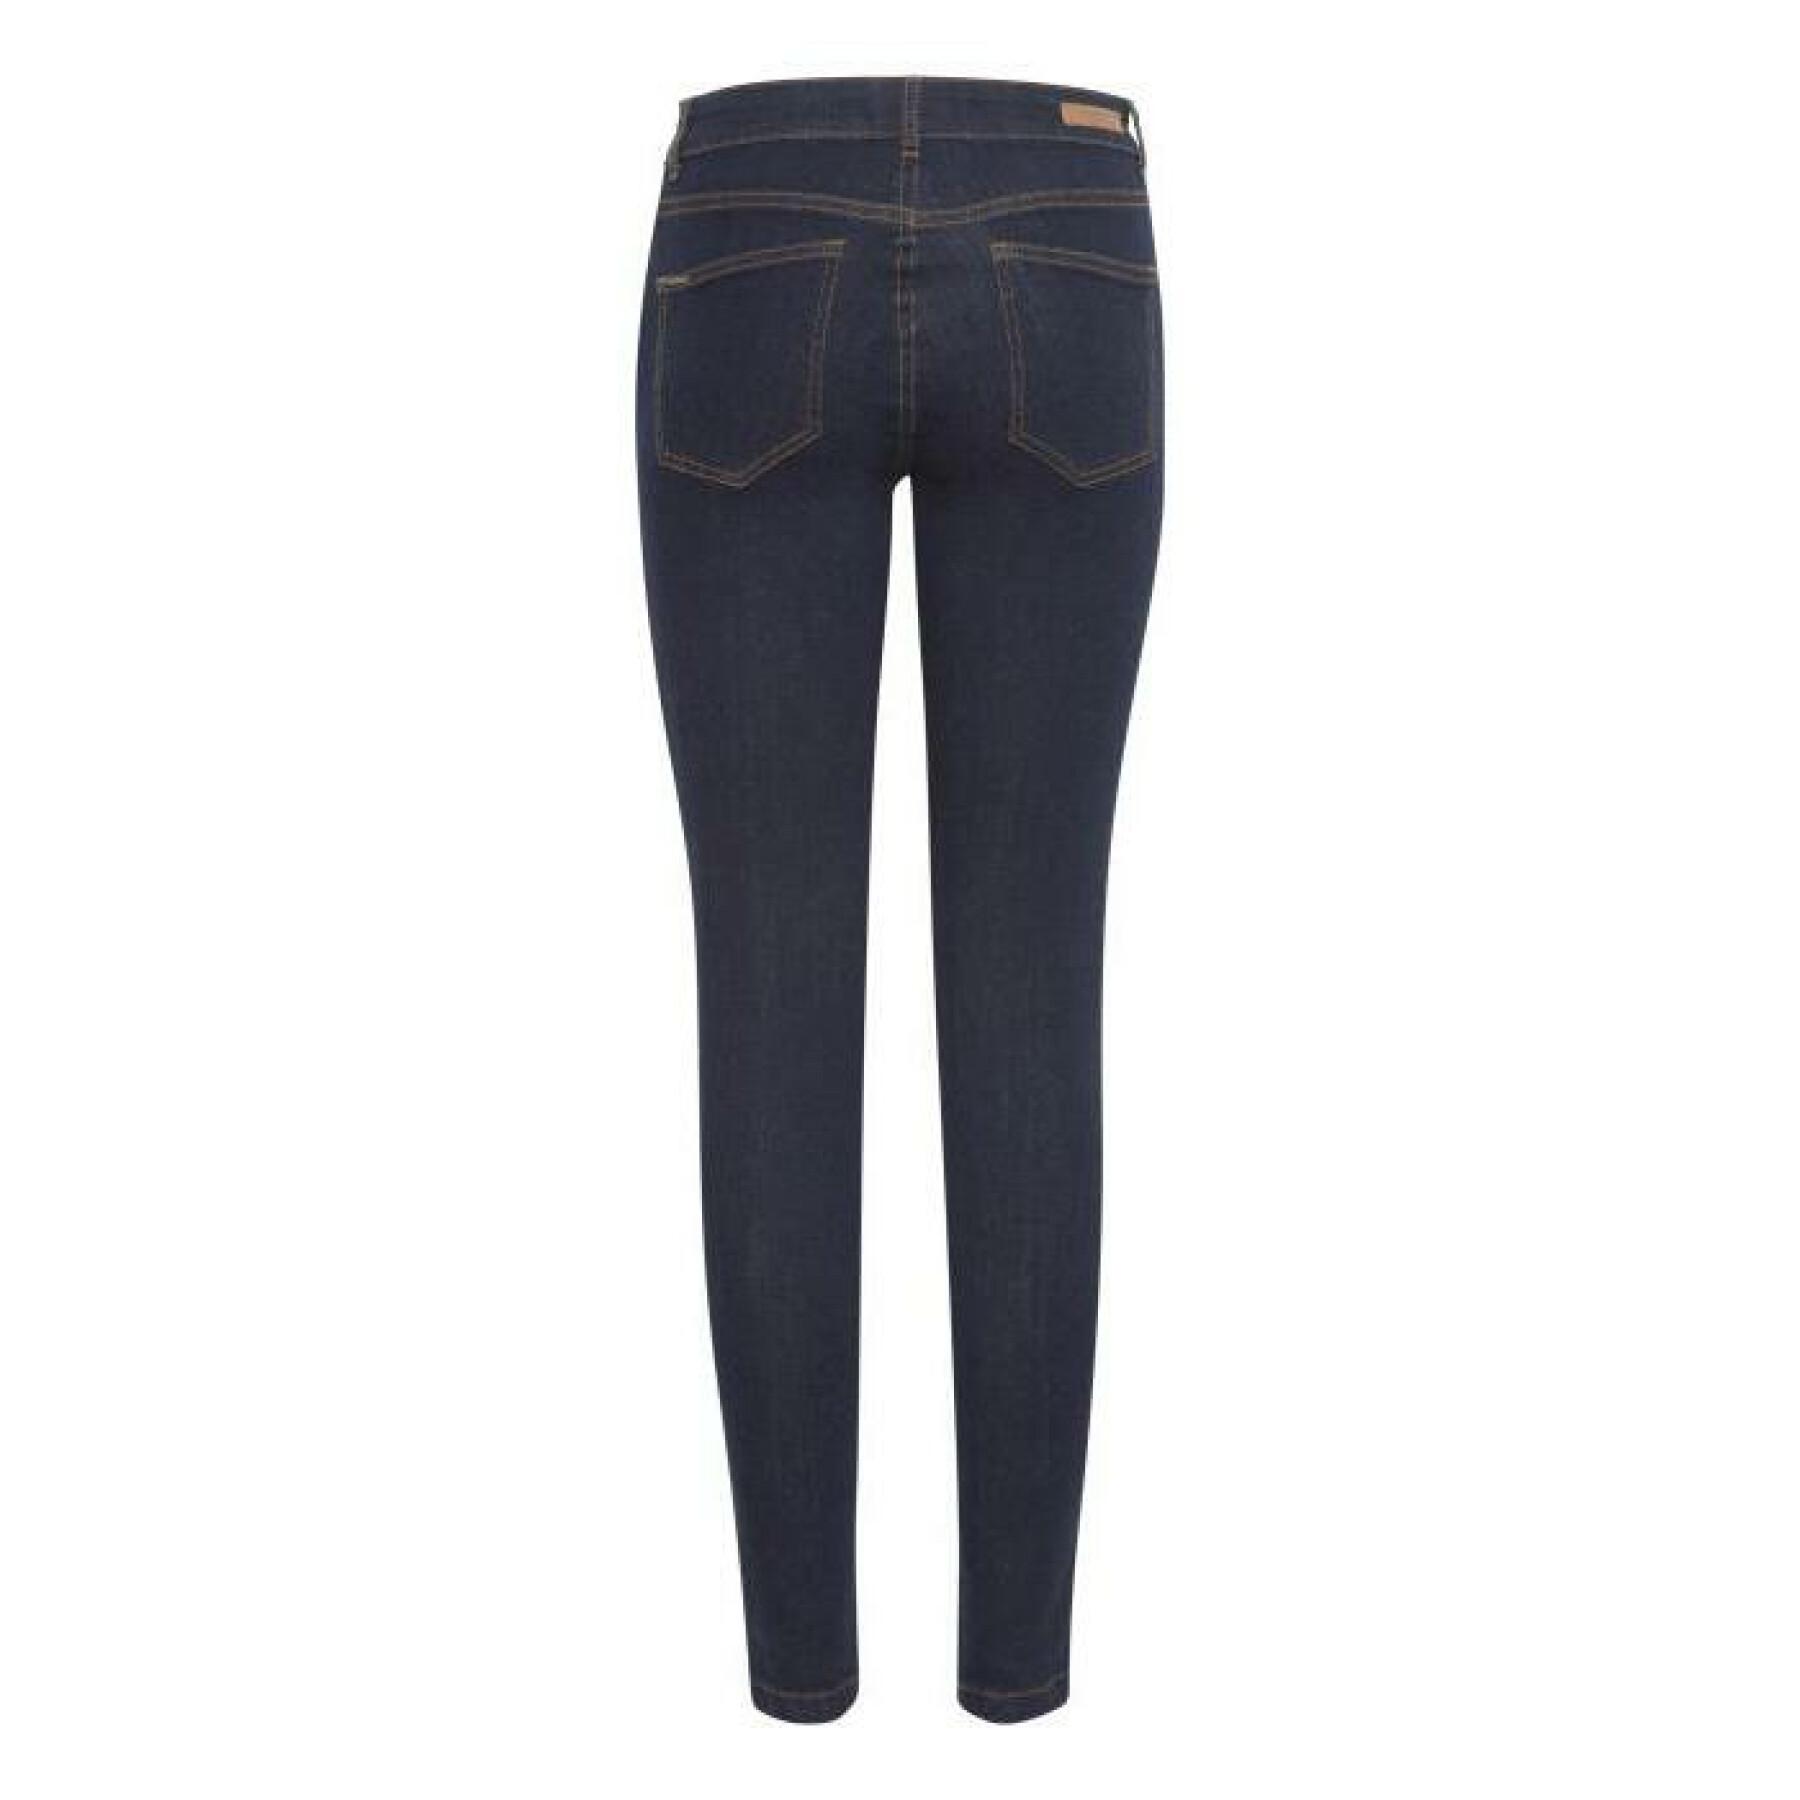 5-pocket jeans voor dames b.young lola luni